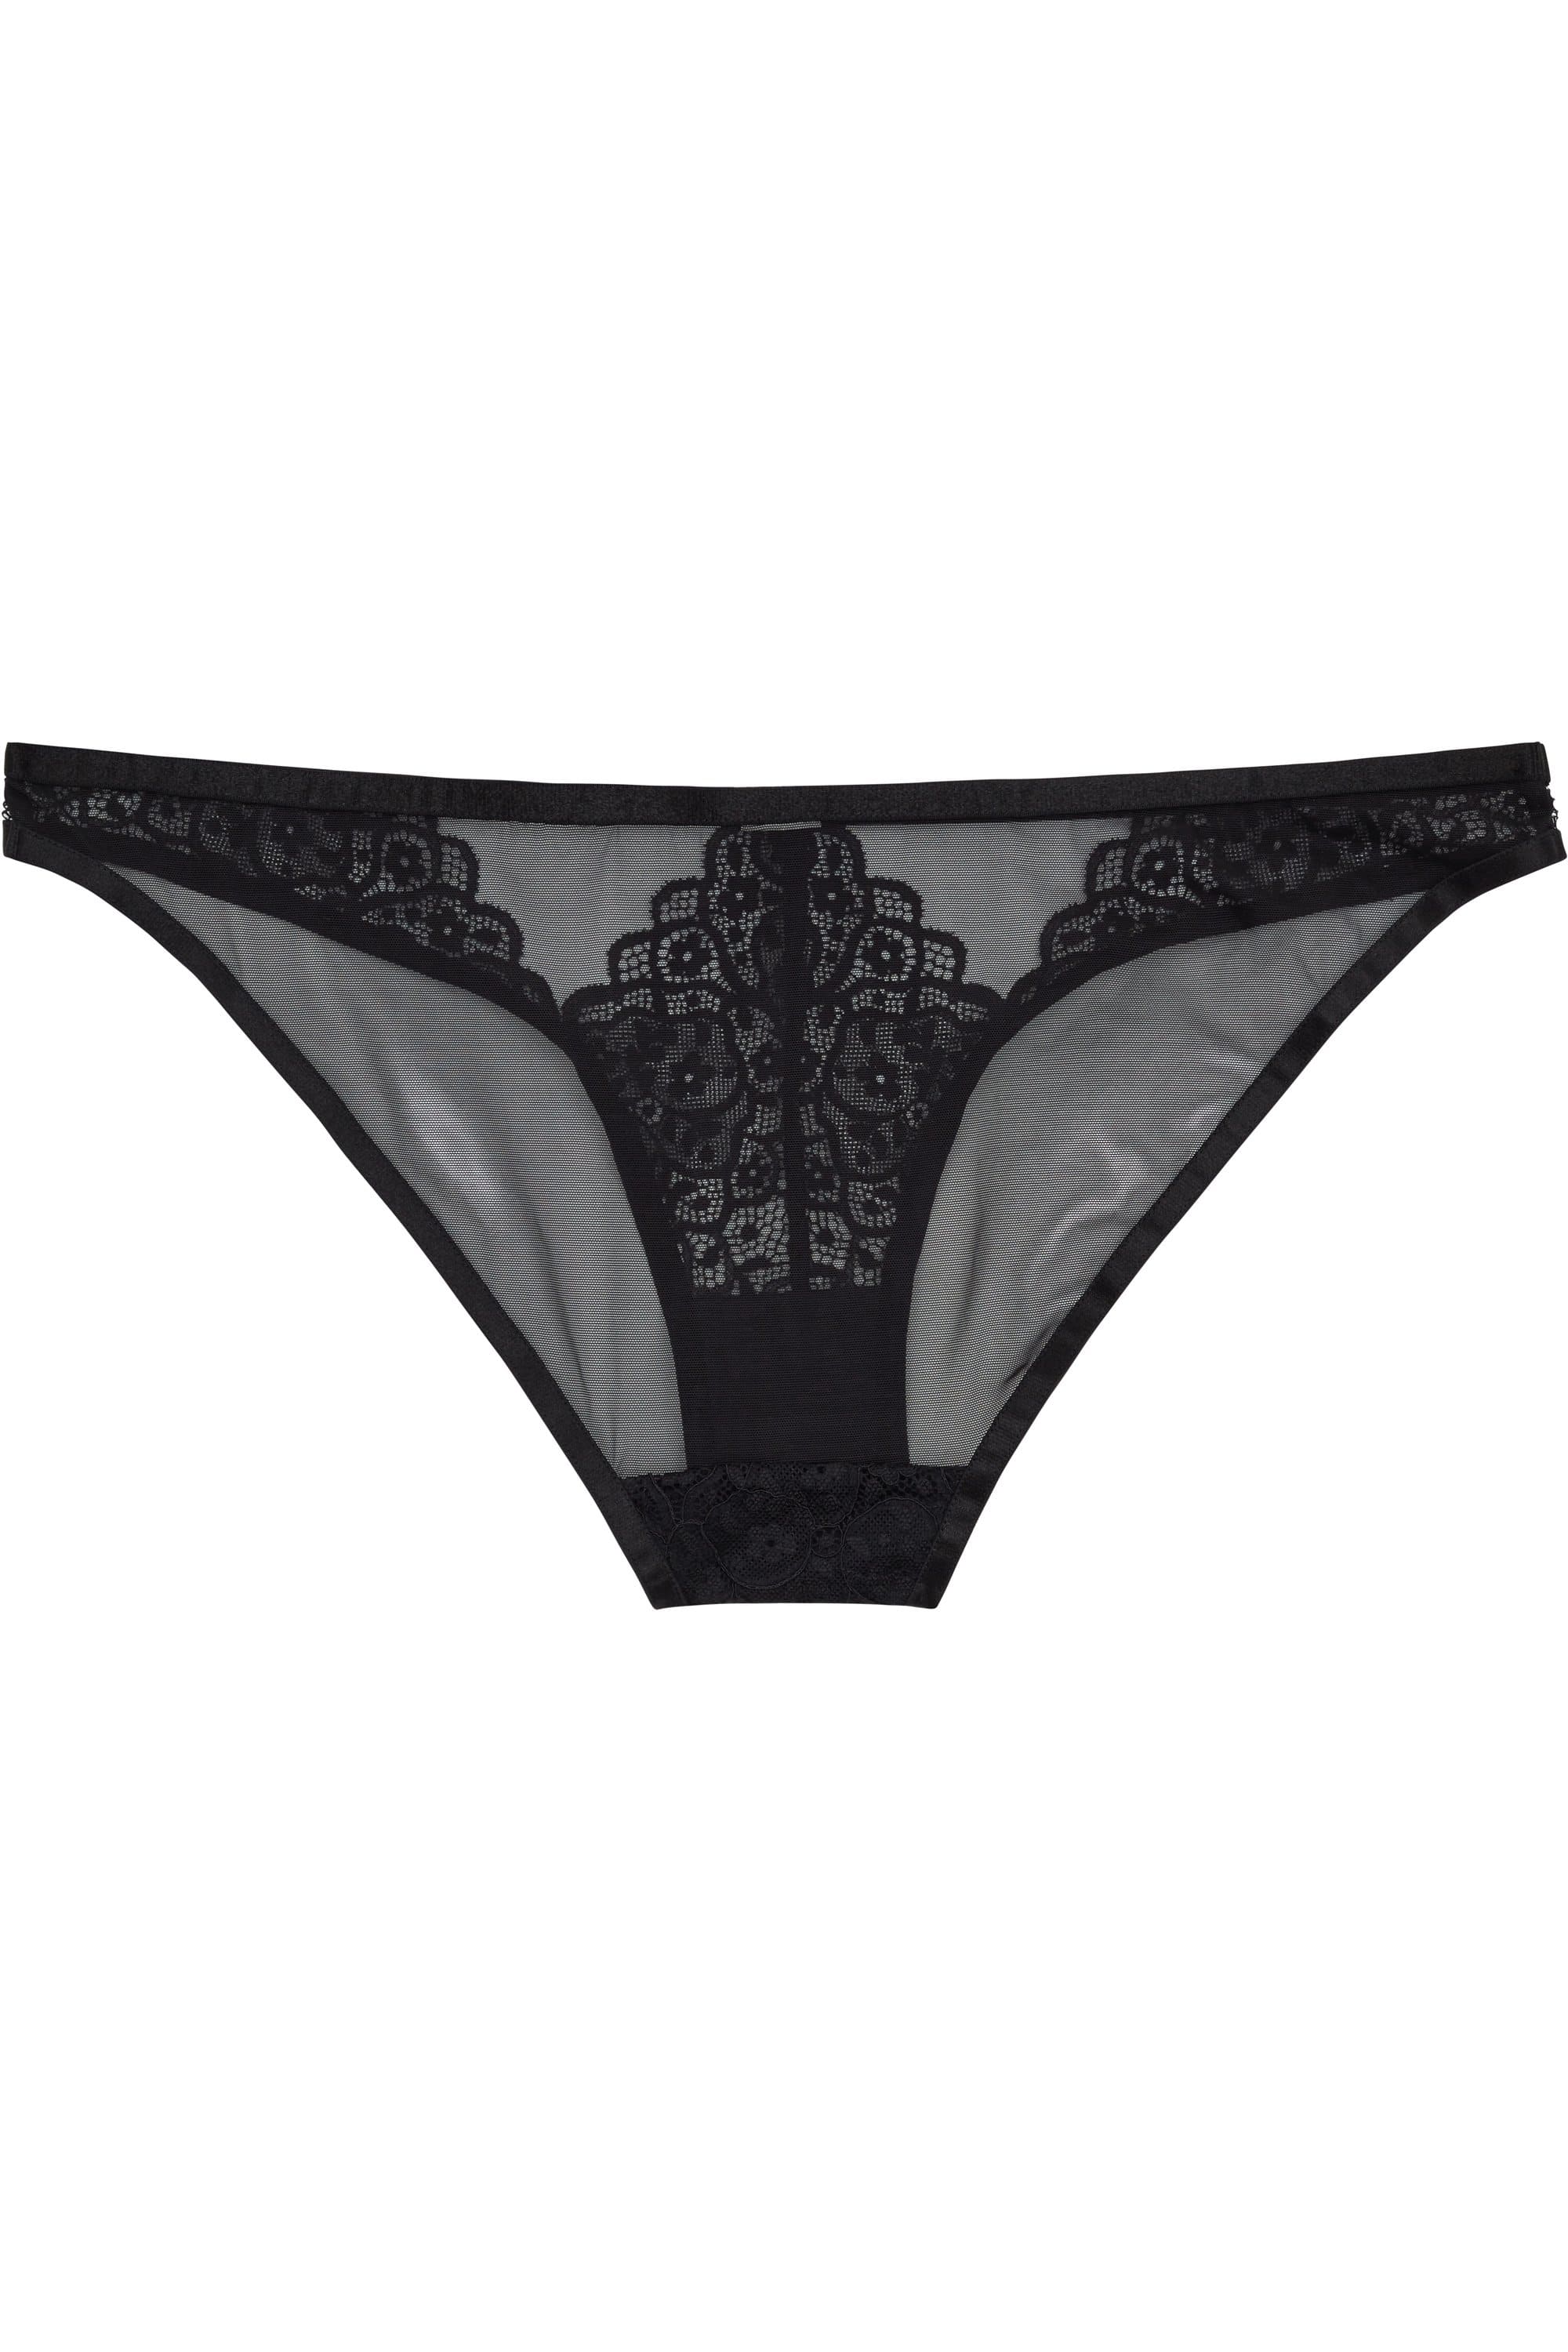 Willa lace cut out briefs